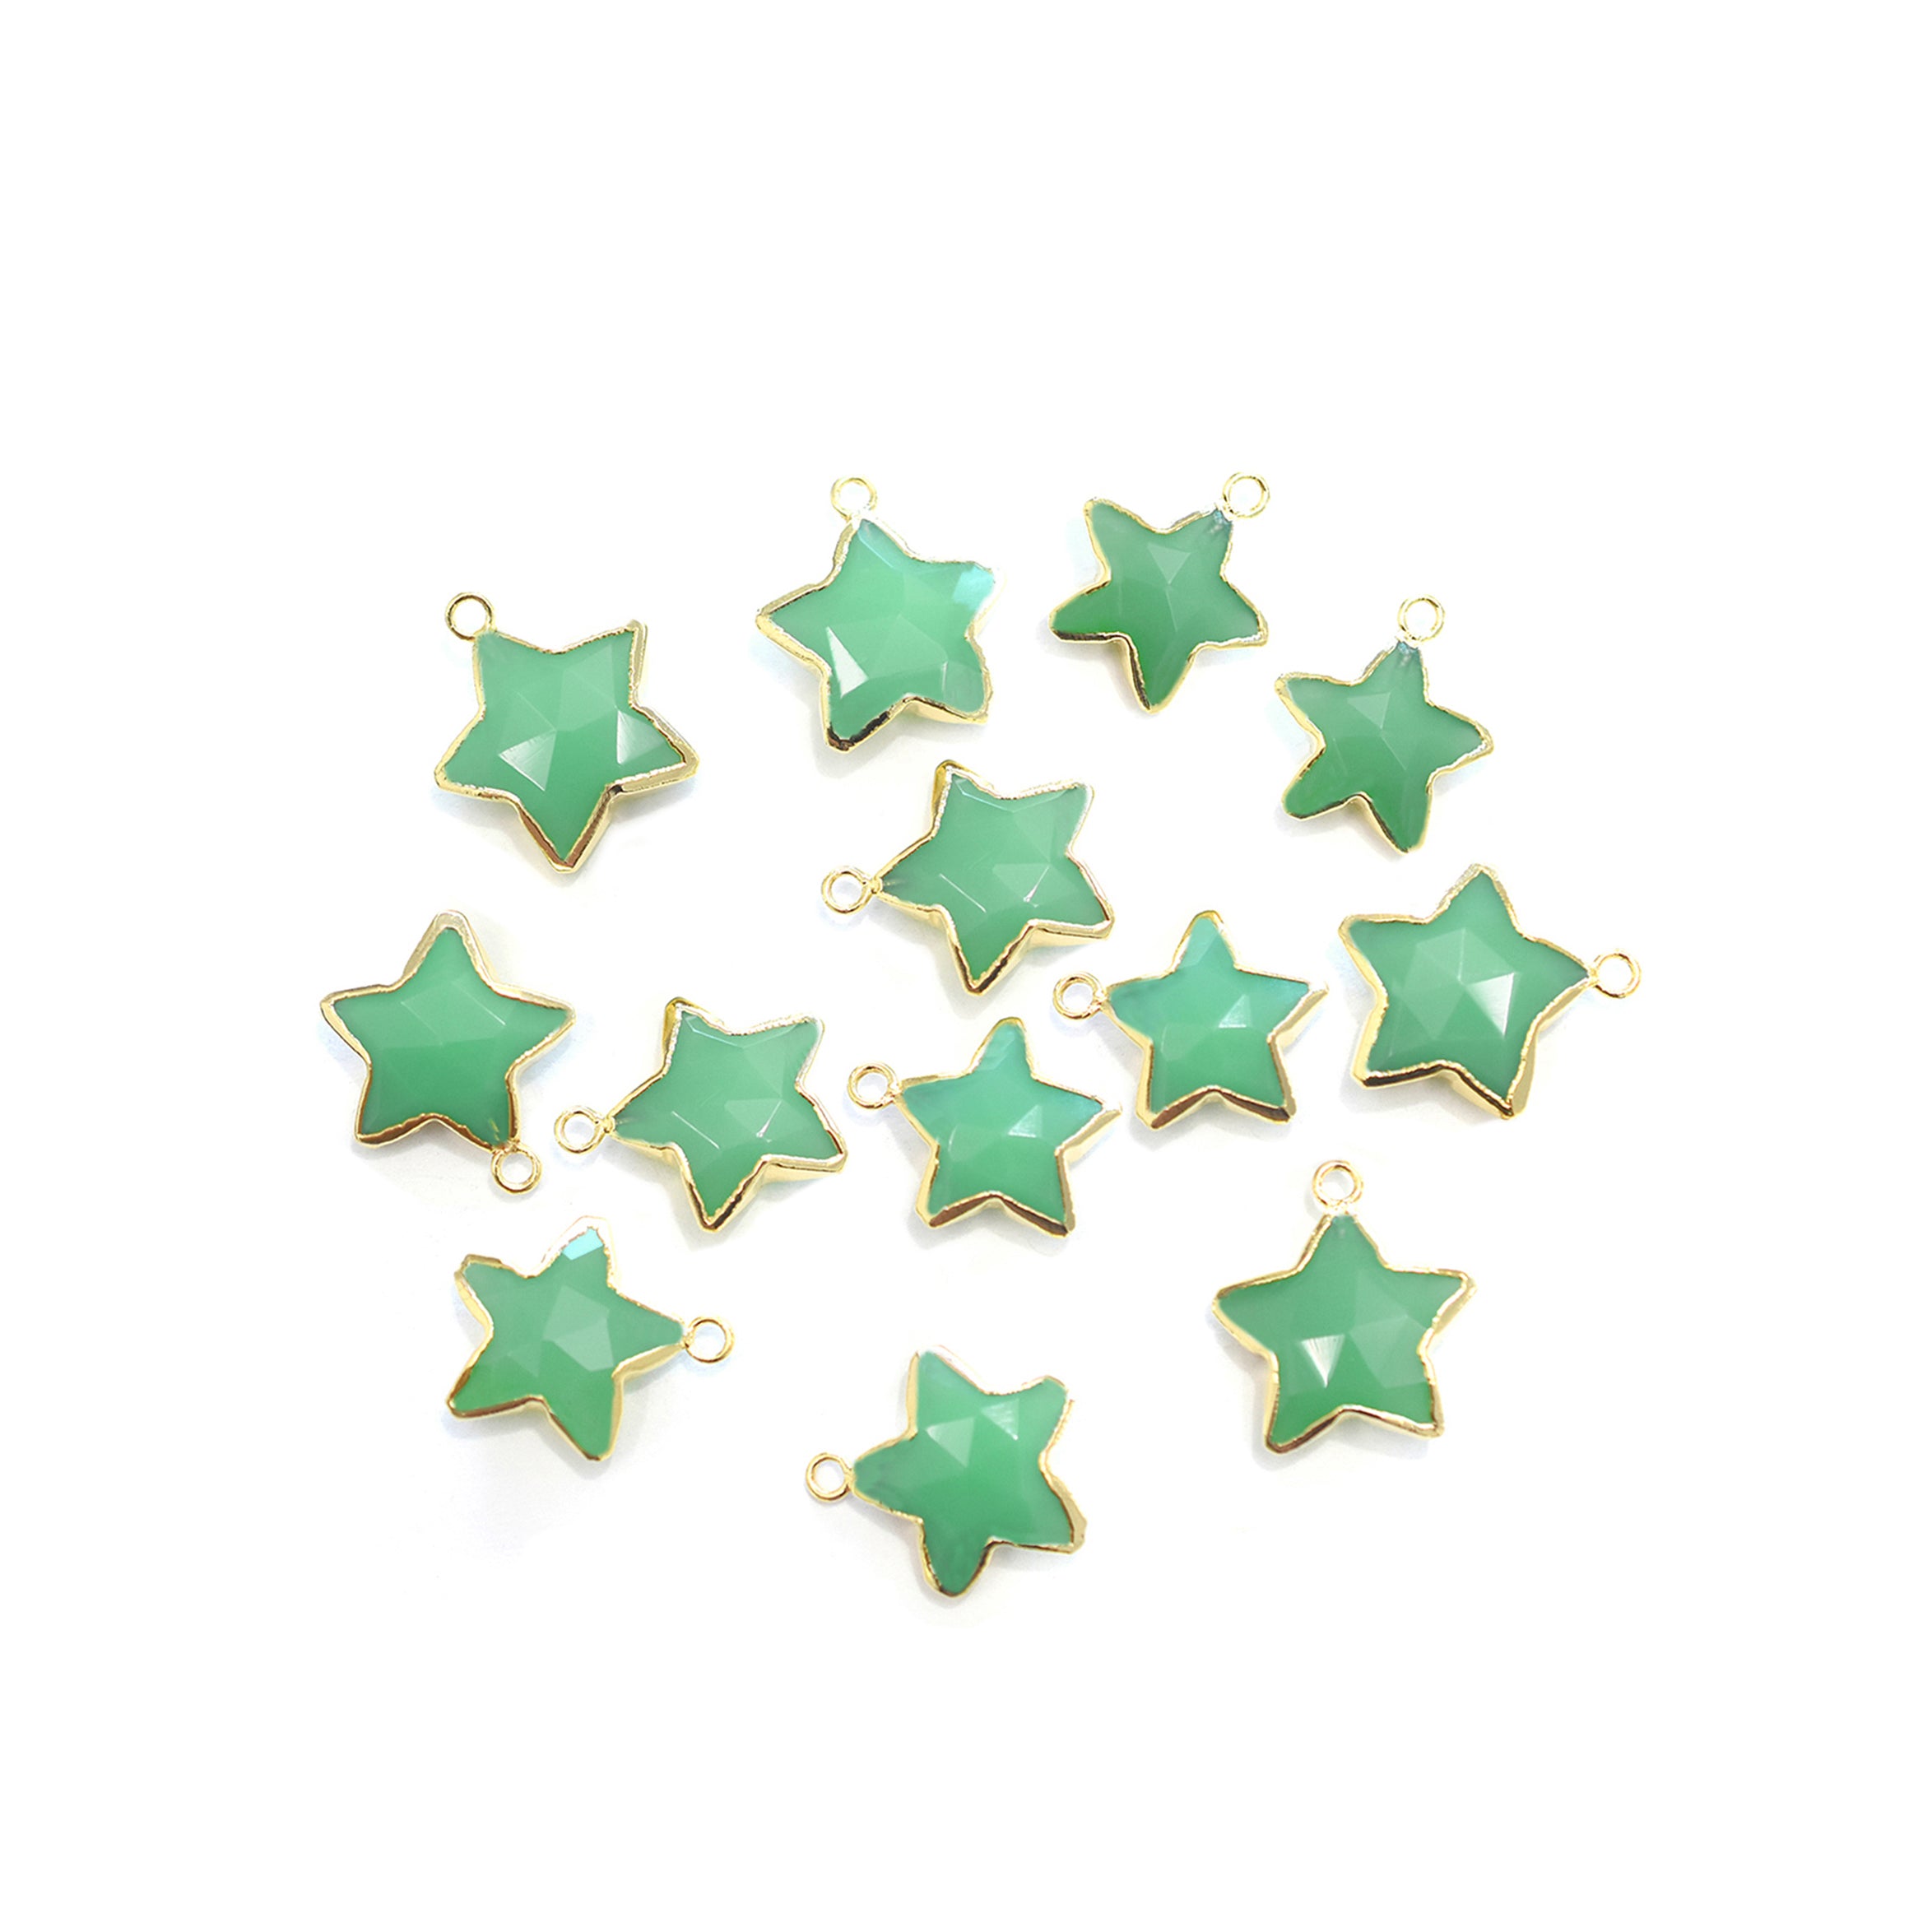 Chrysoprase Chalcedony 10 To 11 MM Star Shape Gold Electroplated Pendant (Set Of 2 Pcs)